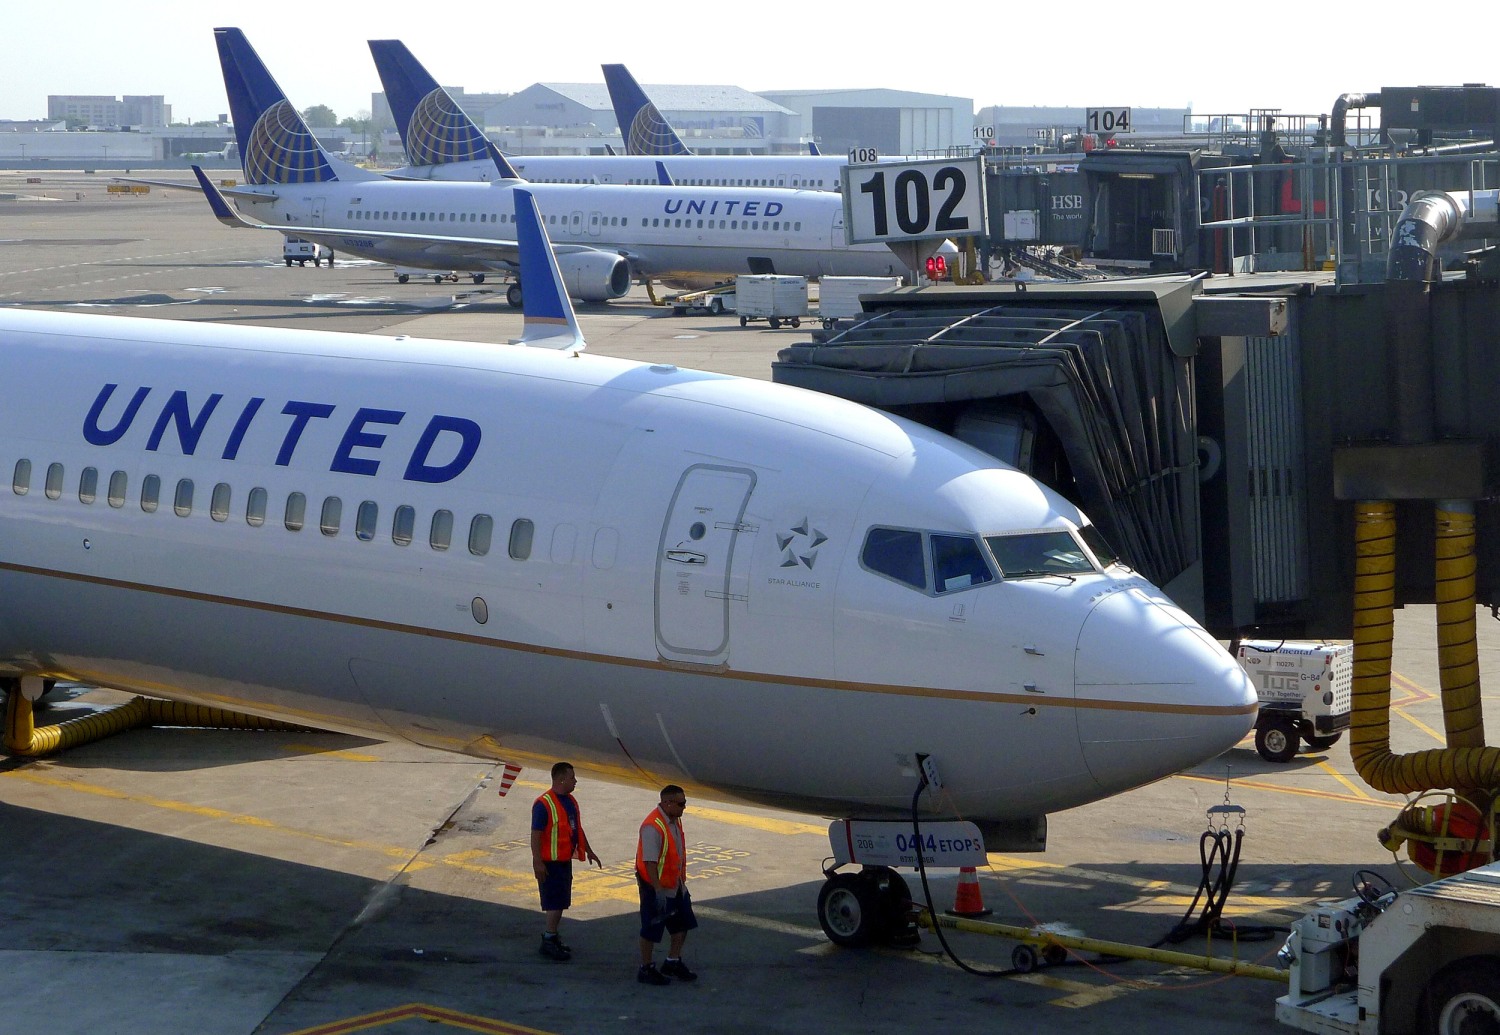 Internet Erupts After United Airlines Boots Girls for Wearing Leggings